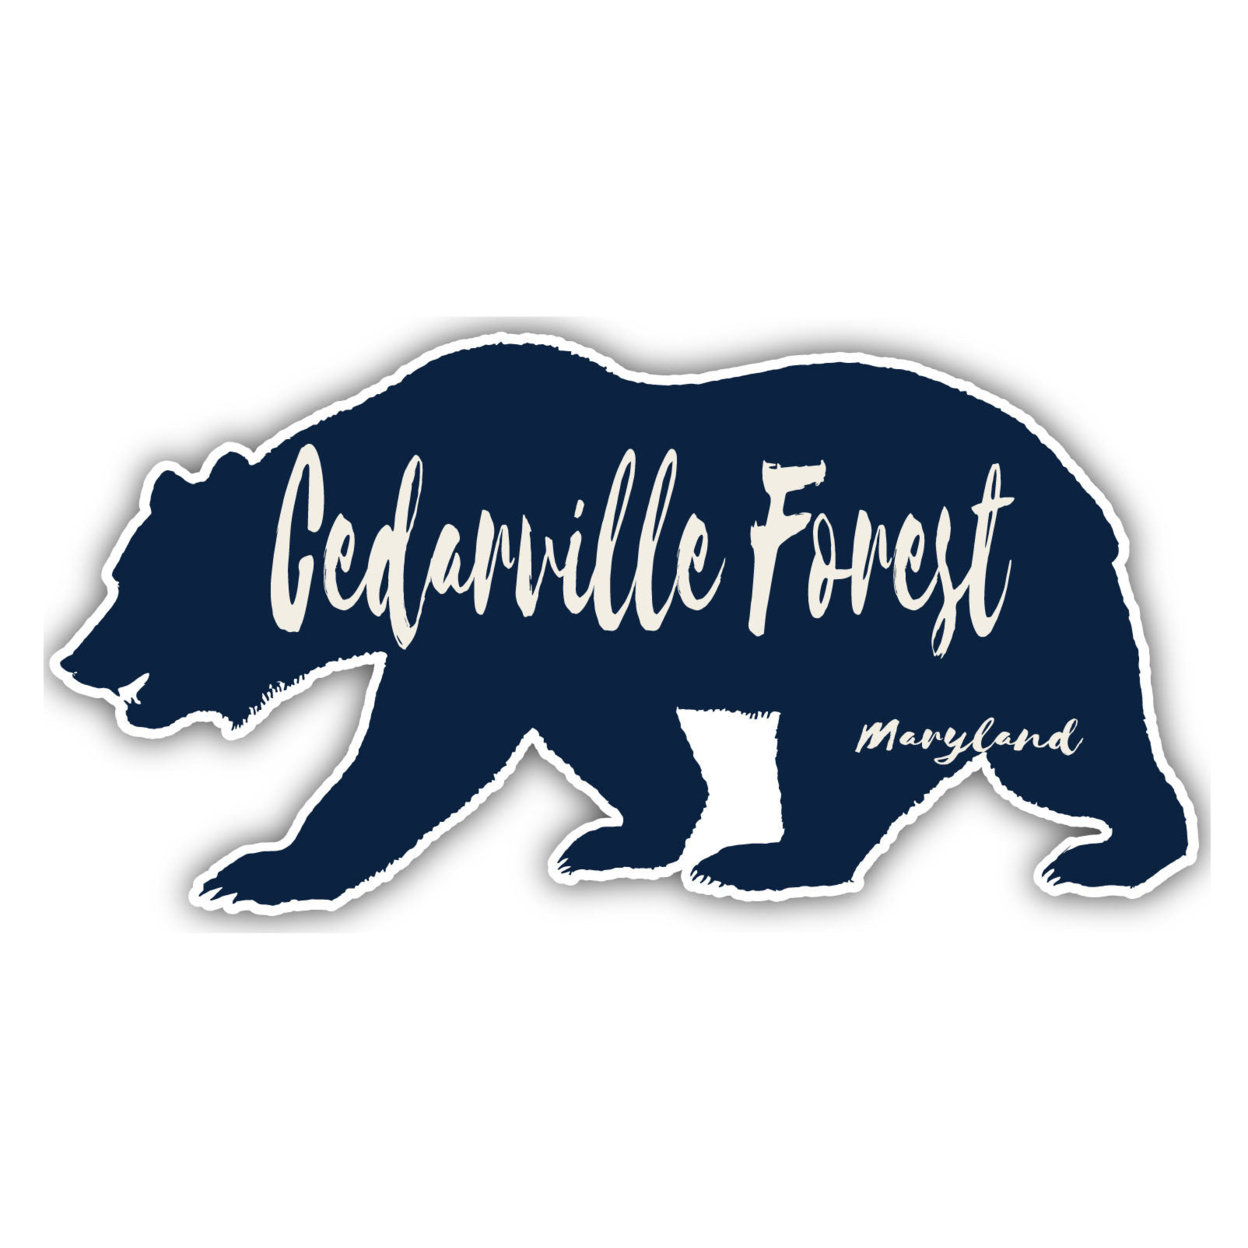 Cedarville Forest Maryland Souvenir Decorative Stickers (Choose Theme And Size) - 4-Pack, 6-Inch, Bear